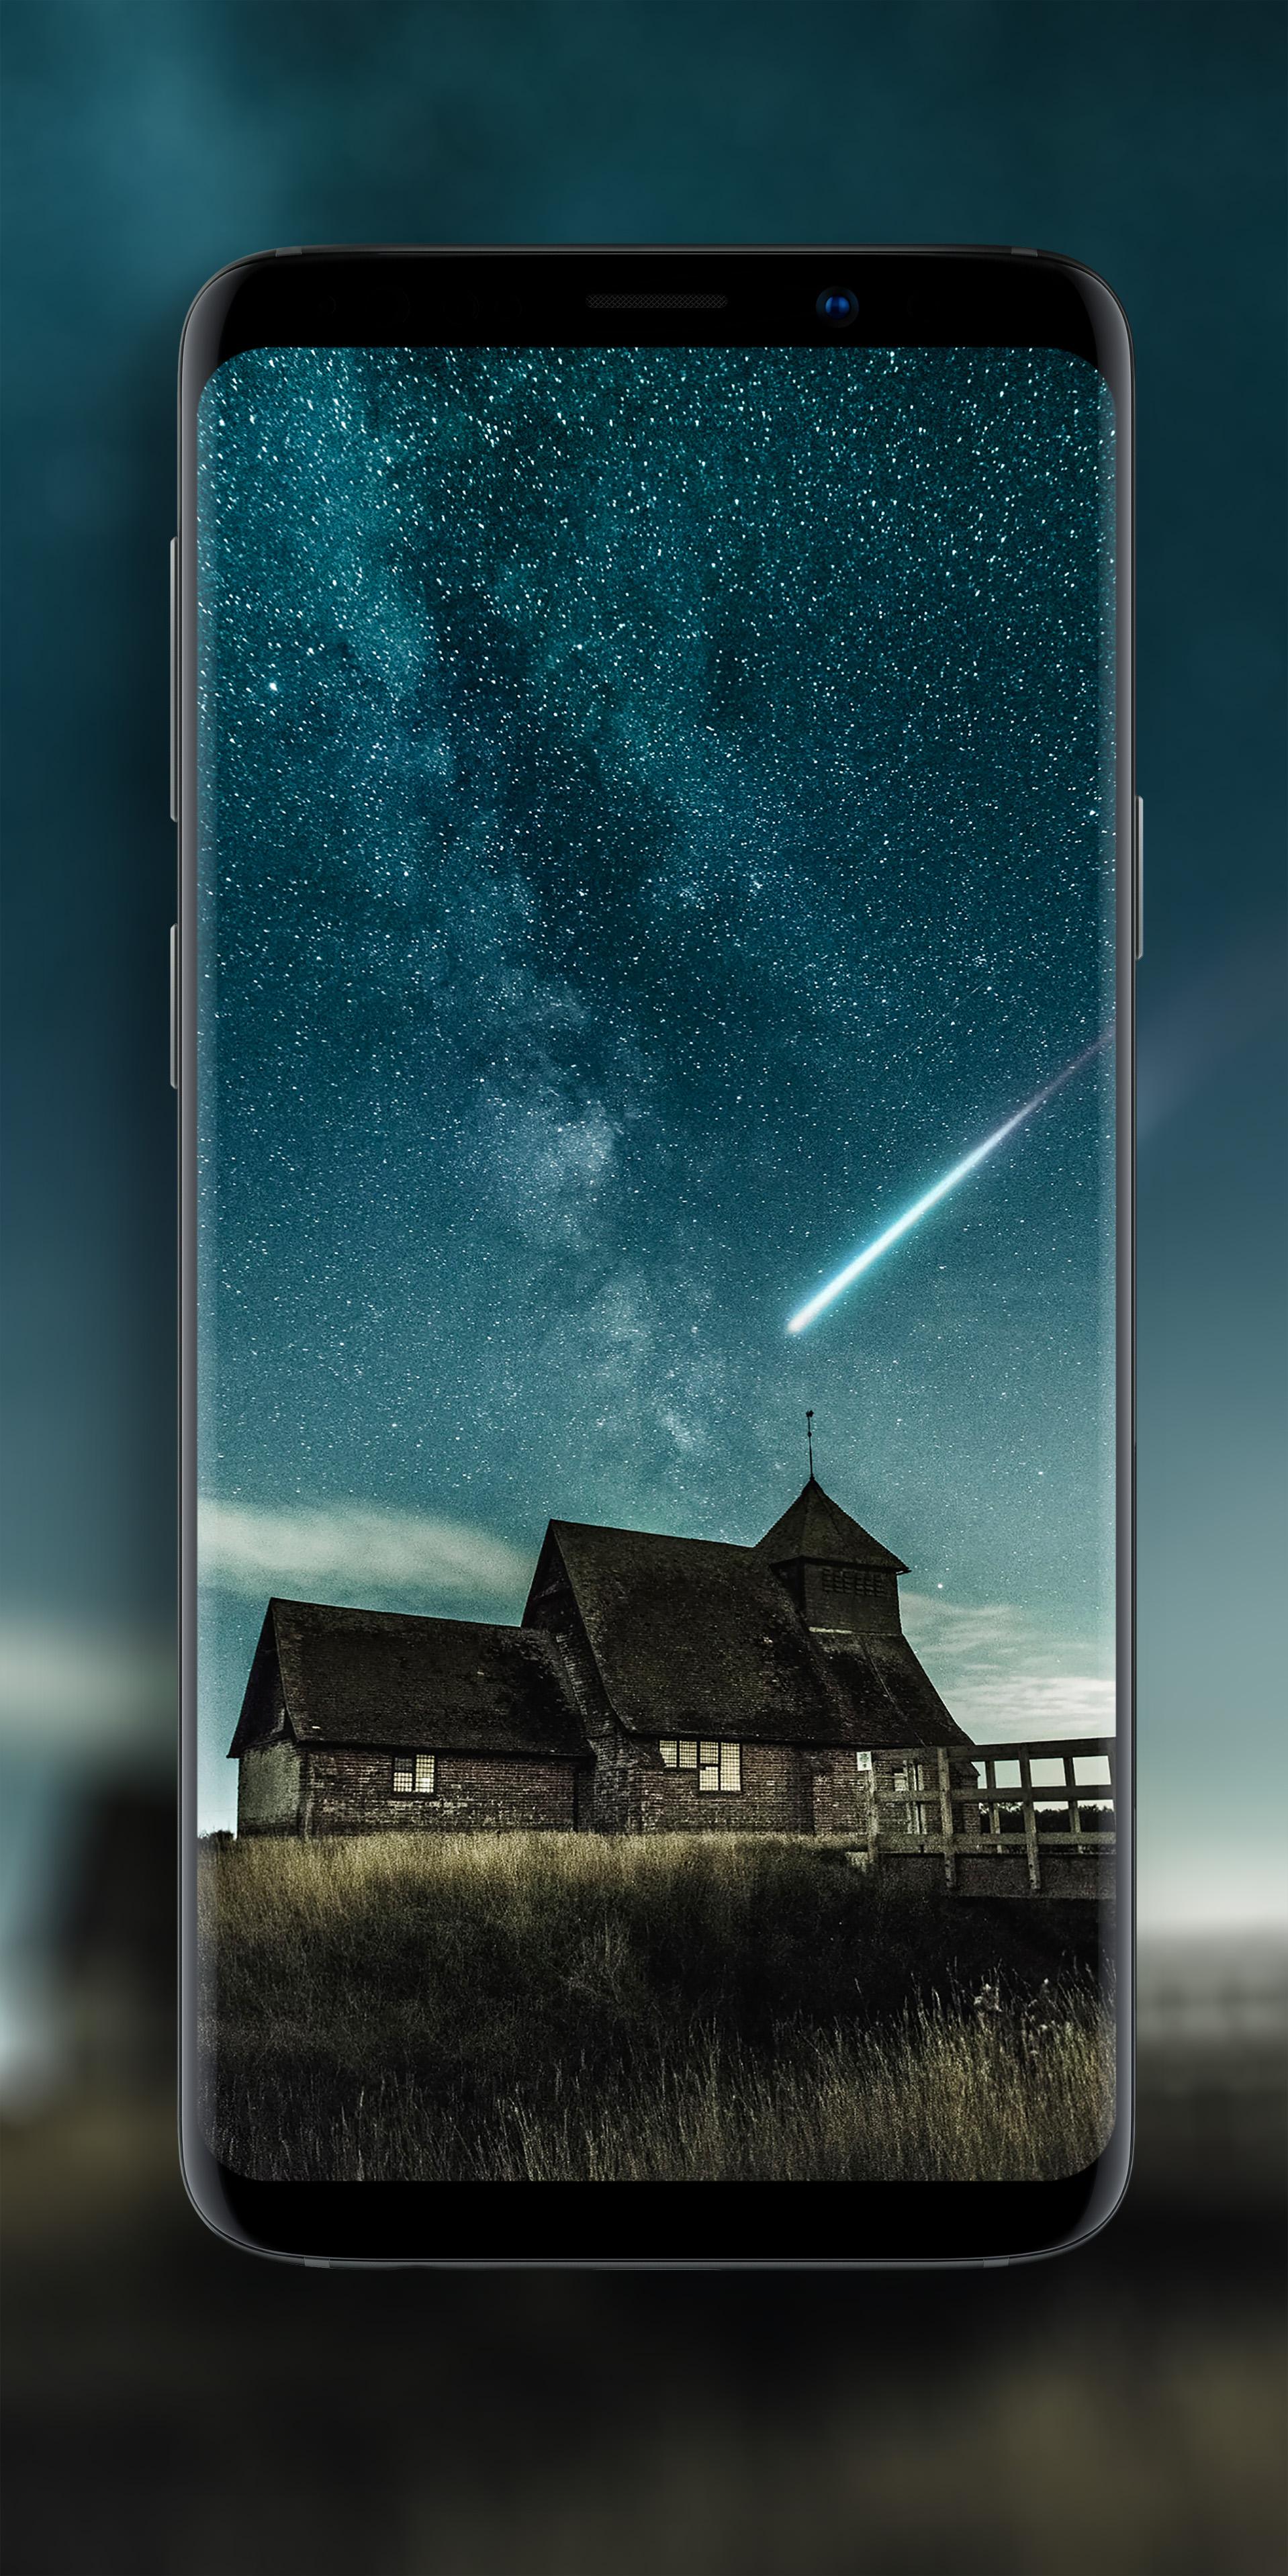 4K Wallpapers - HD Backgrounds - Auto Changer for Android - APK Download